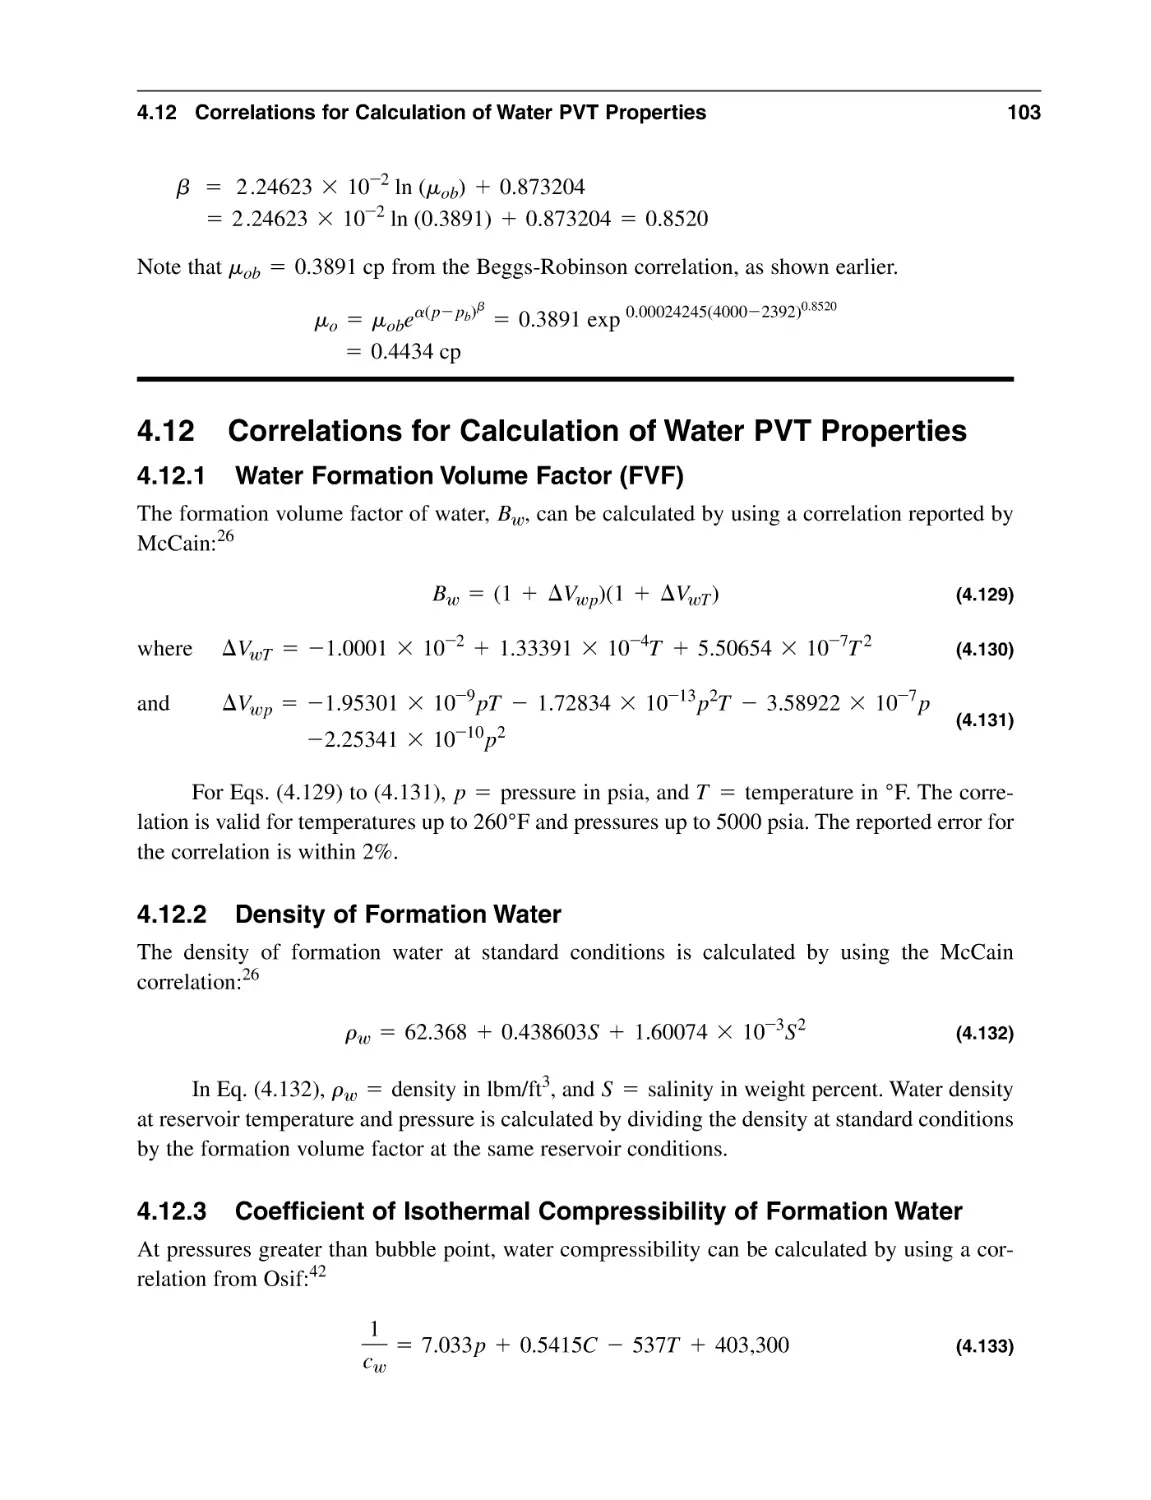 4.12 Correlations for Calculation of Water PVT Properties
4.12.1 Water Formation Volume Factor (FVF)
4.12.2 Density of Formation Water
4.12.3 Coefficient of Isothermal Compressibility of Formation Water